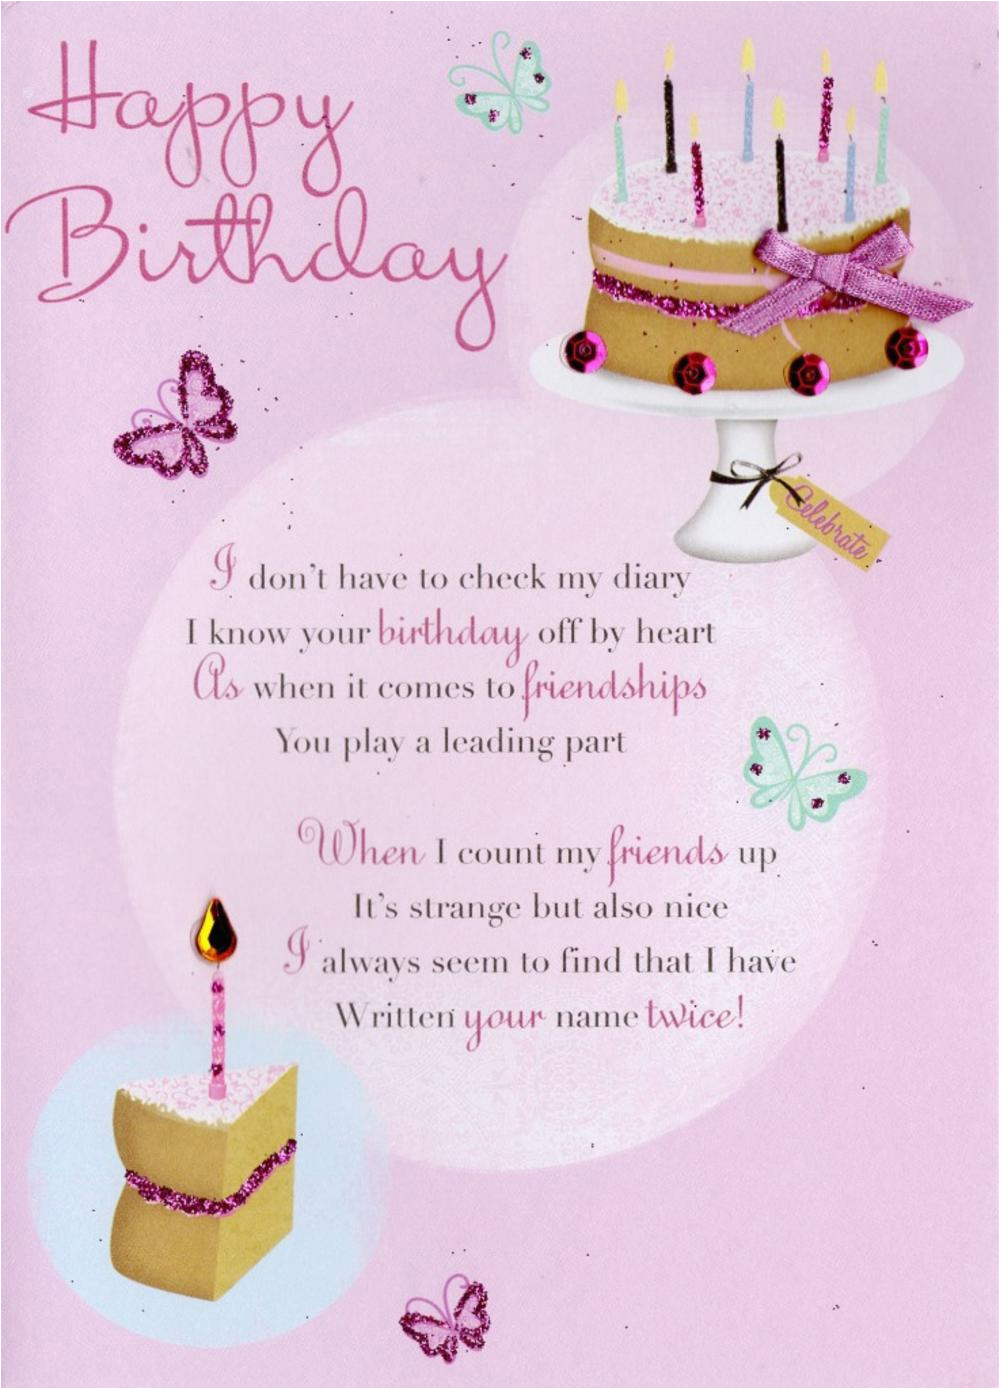 kcsnhwd005 friend happy birthday greeting card second nature poetic words cards